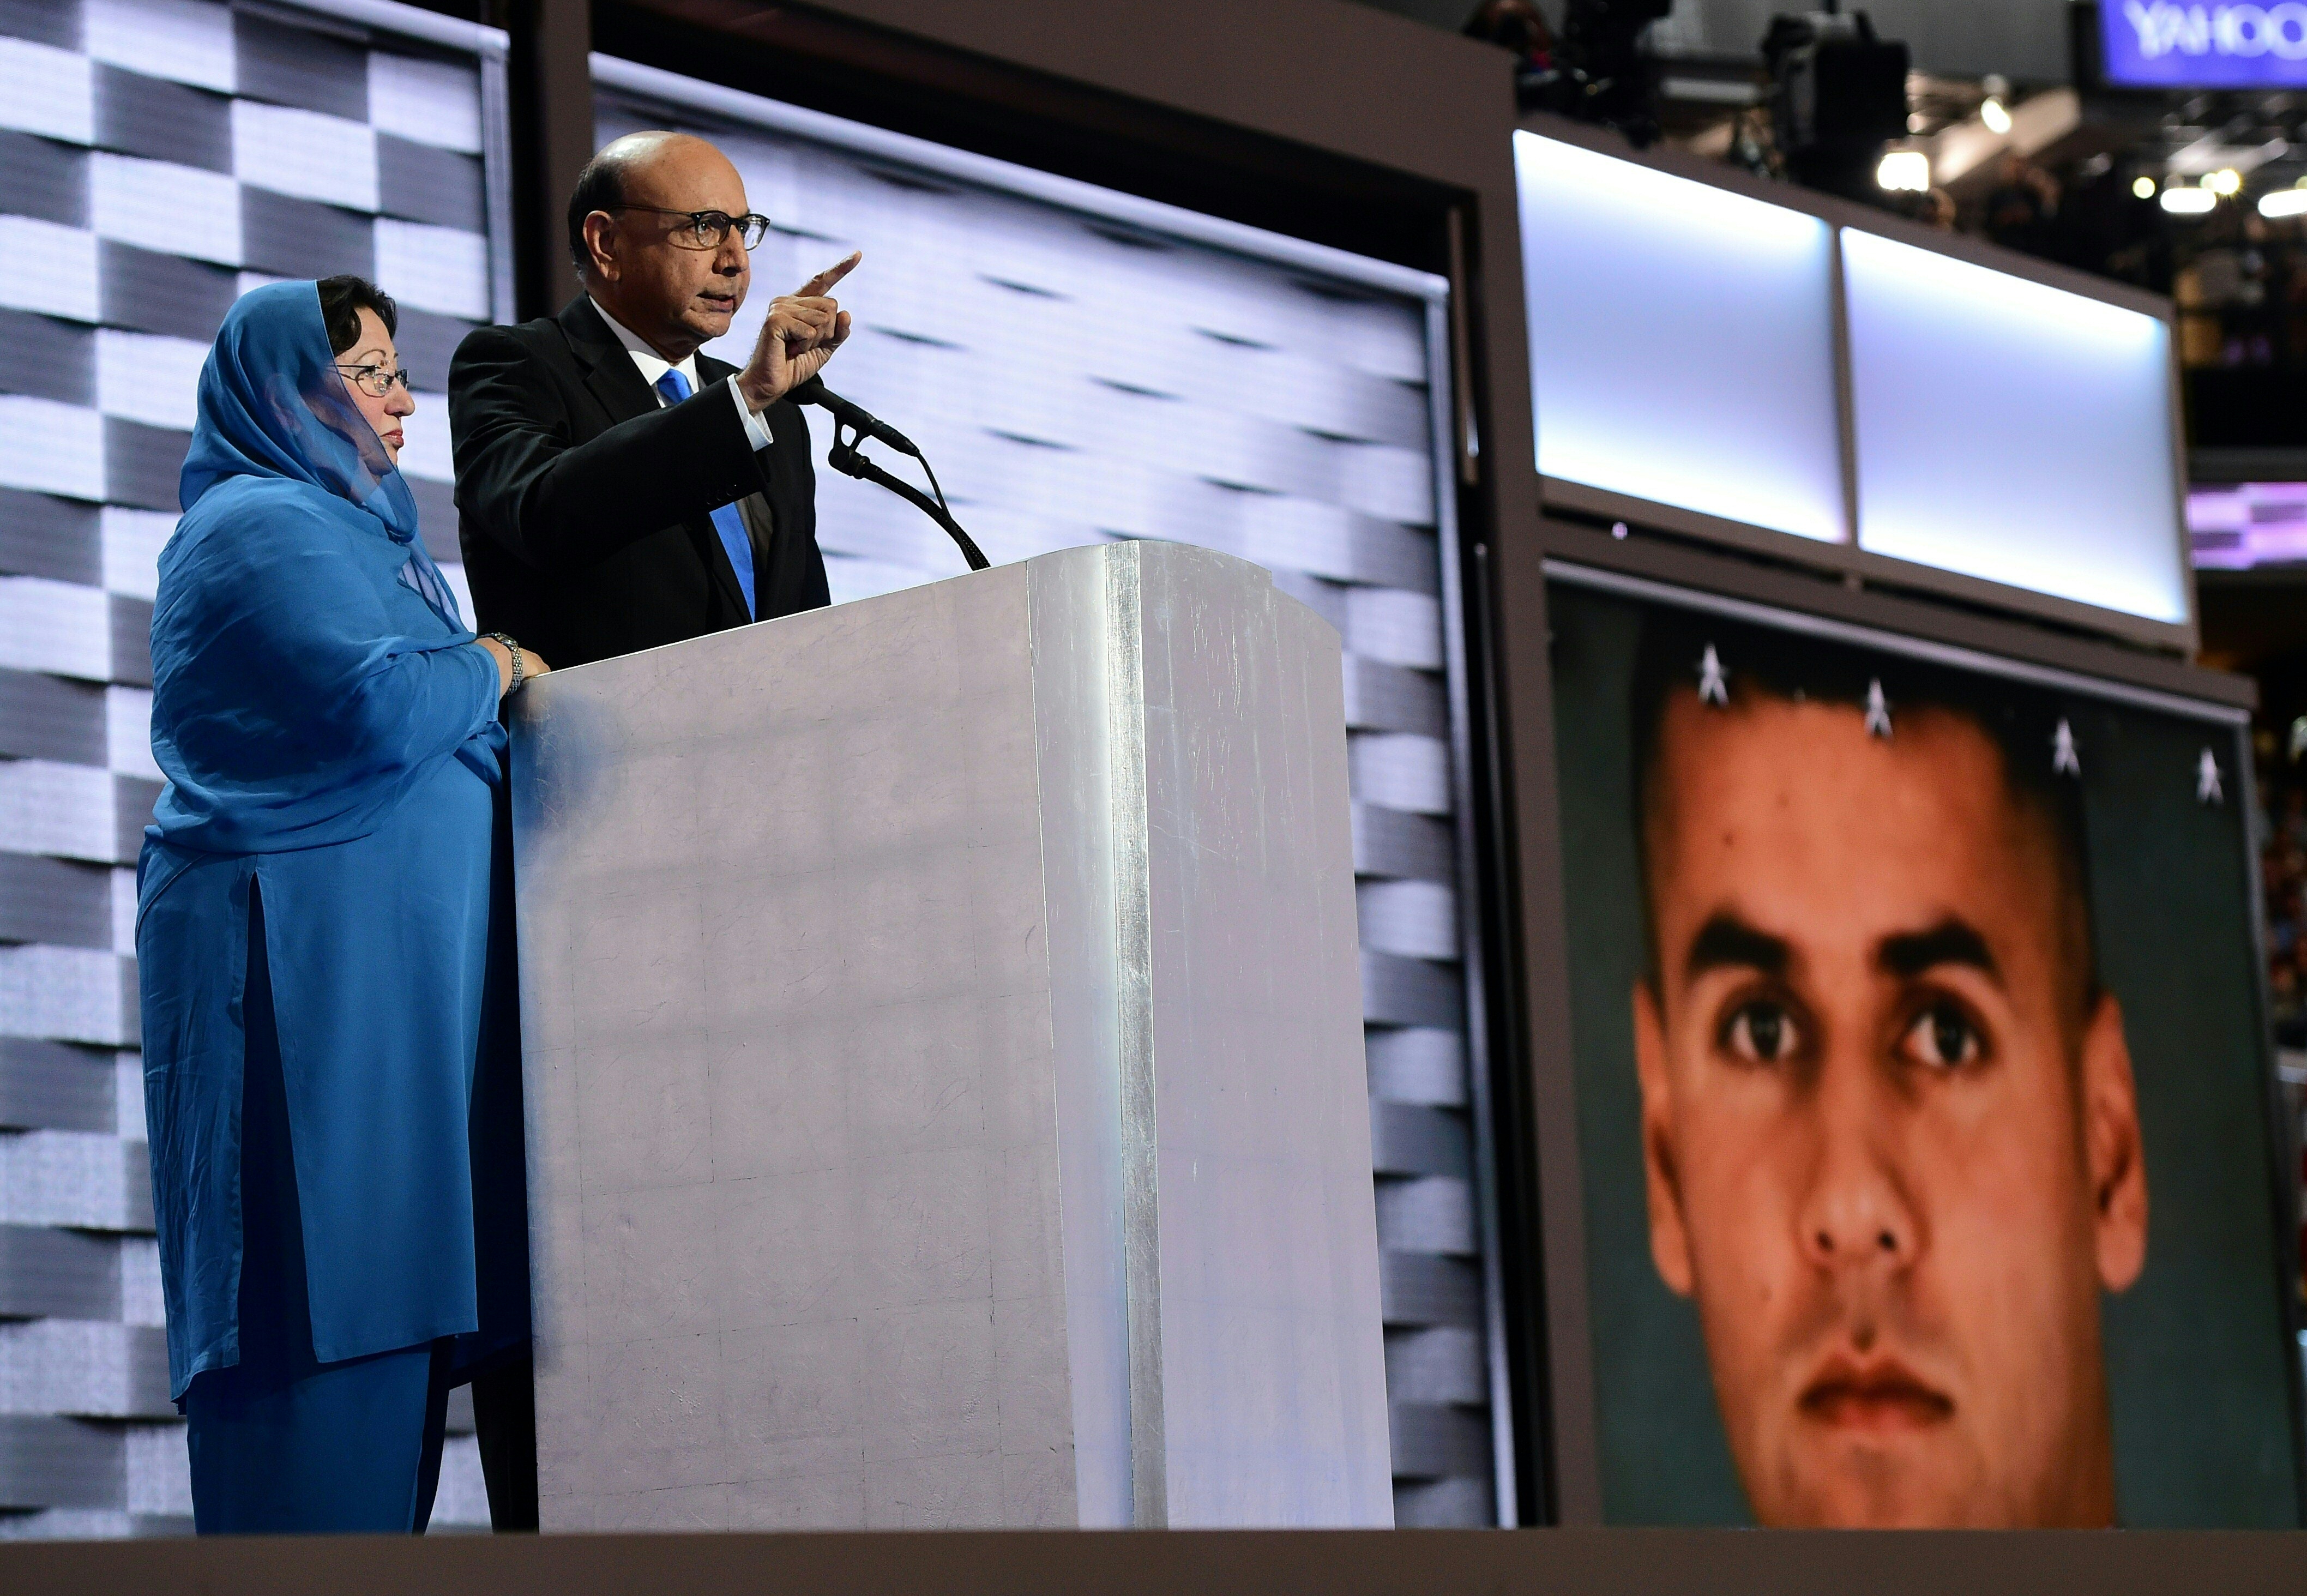 Khizr Khan speaks during the final day of the 2016 Democratic National Convention on July 28, 2016, in Philadelphia, PA. (Robyn Beck&mdash;AFP/Getty Images)